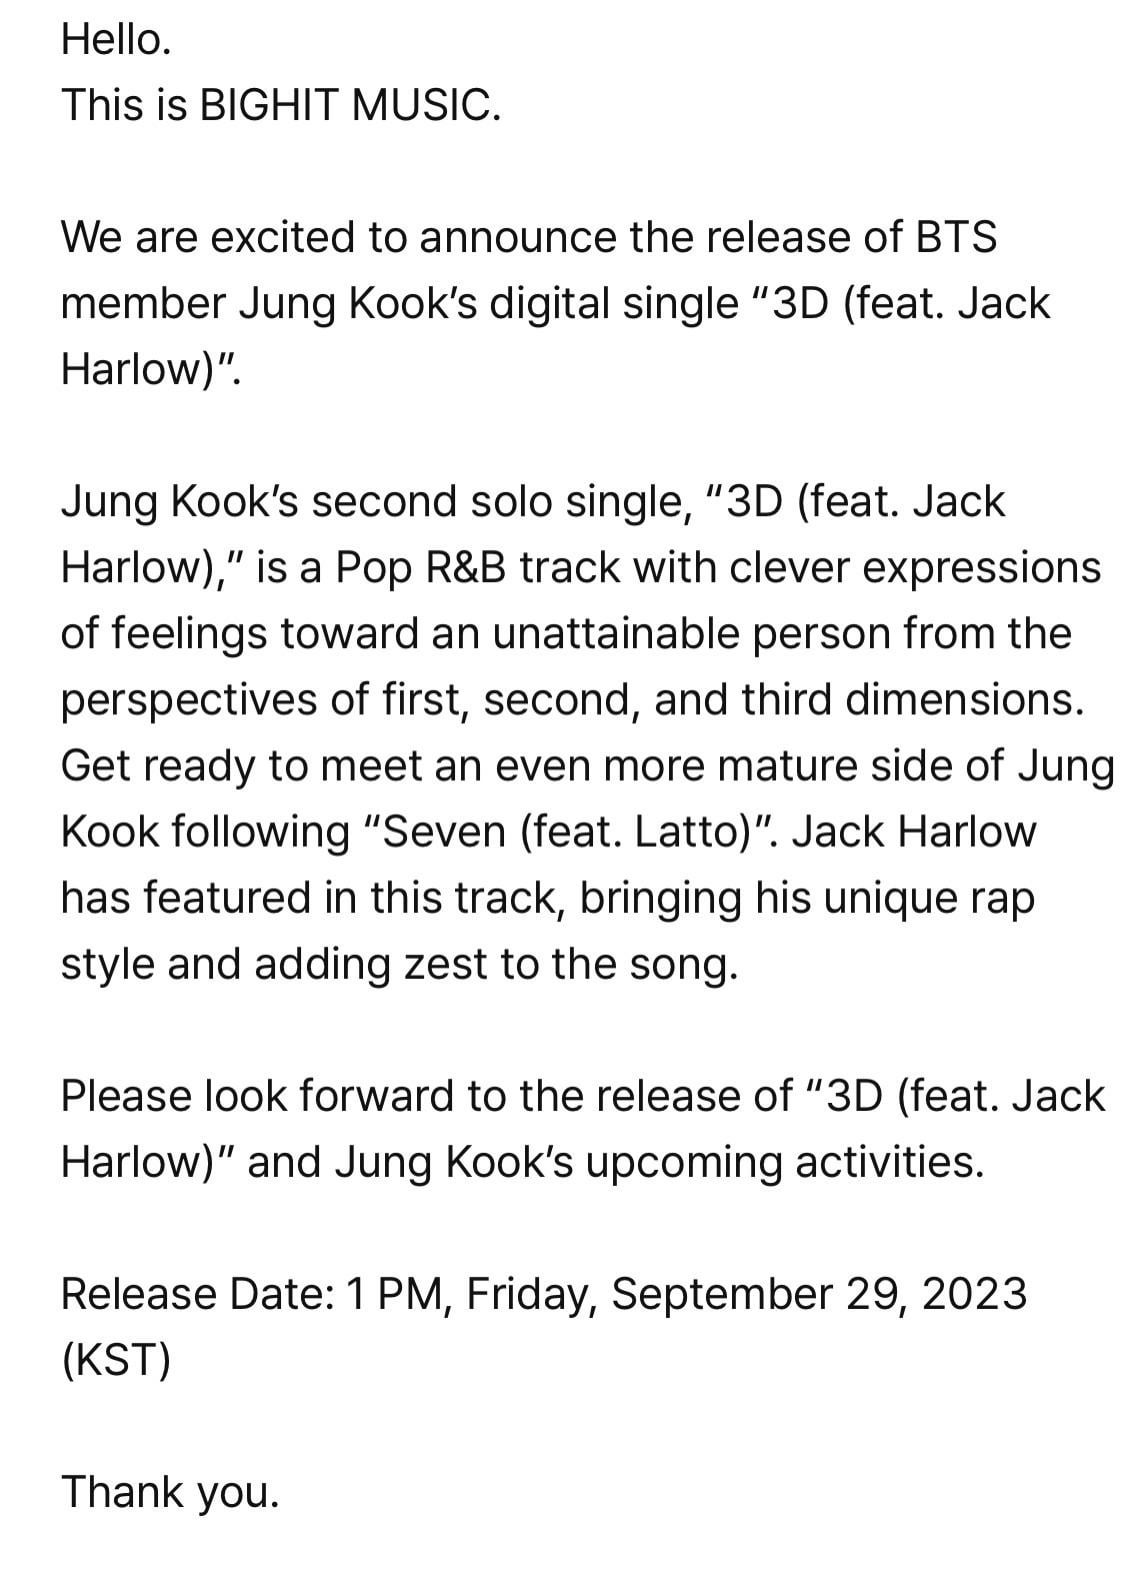 3D (feat. Jack Harlow) by Jungkook release on Friday 29 September 1pm KST - 240923